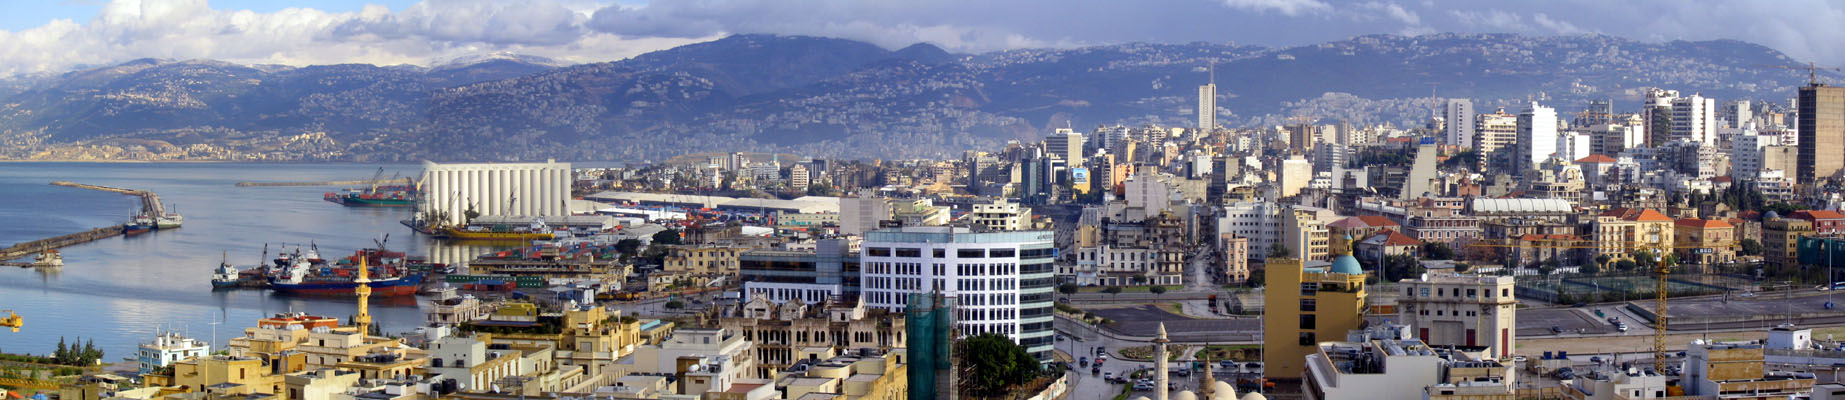  Beirut - Panoramic view from north to south taken from the St. Louis clock tower, with the Souks Project seen on the left and the tall buildings of the Ashrafieh neighborhood on the right. The Kesrouan and Metn mountains are seen in the background, dotted with villages